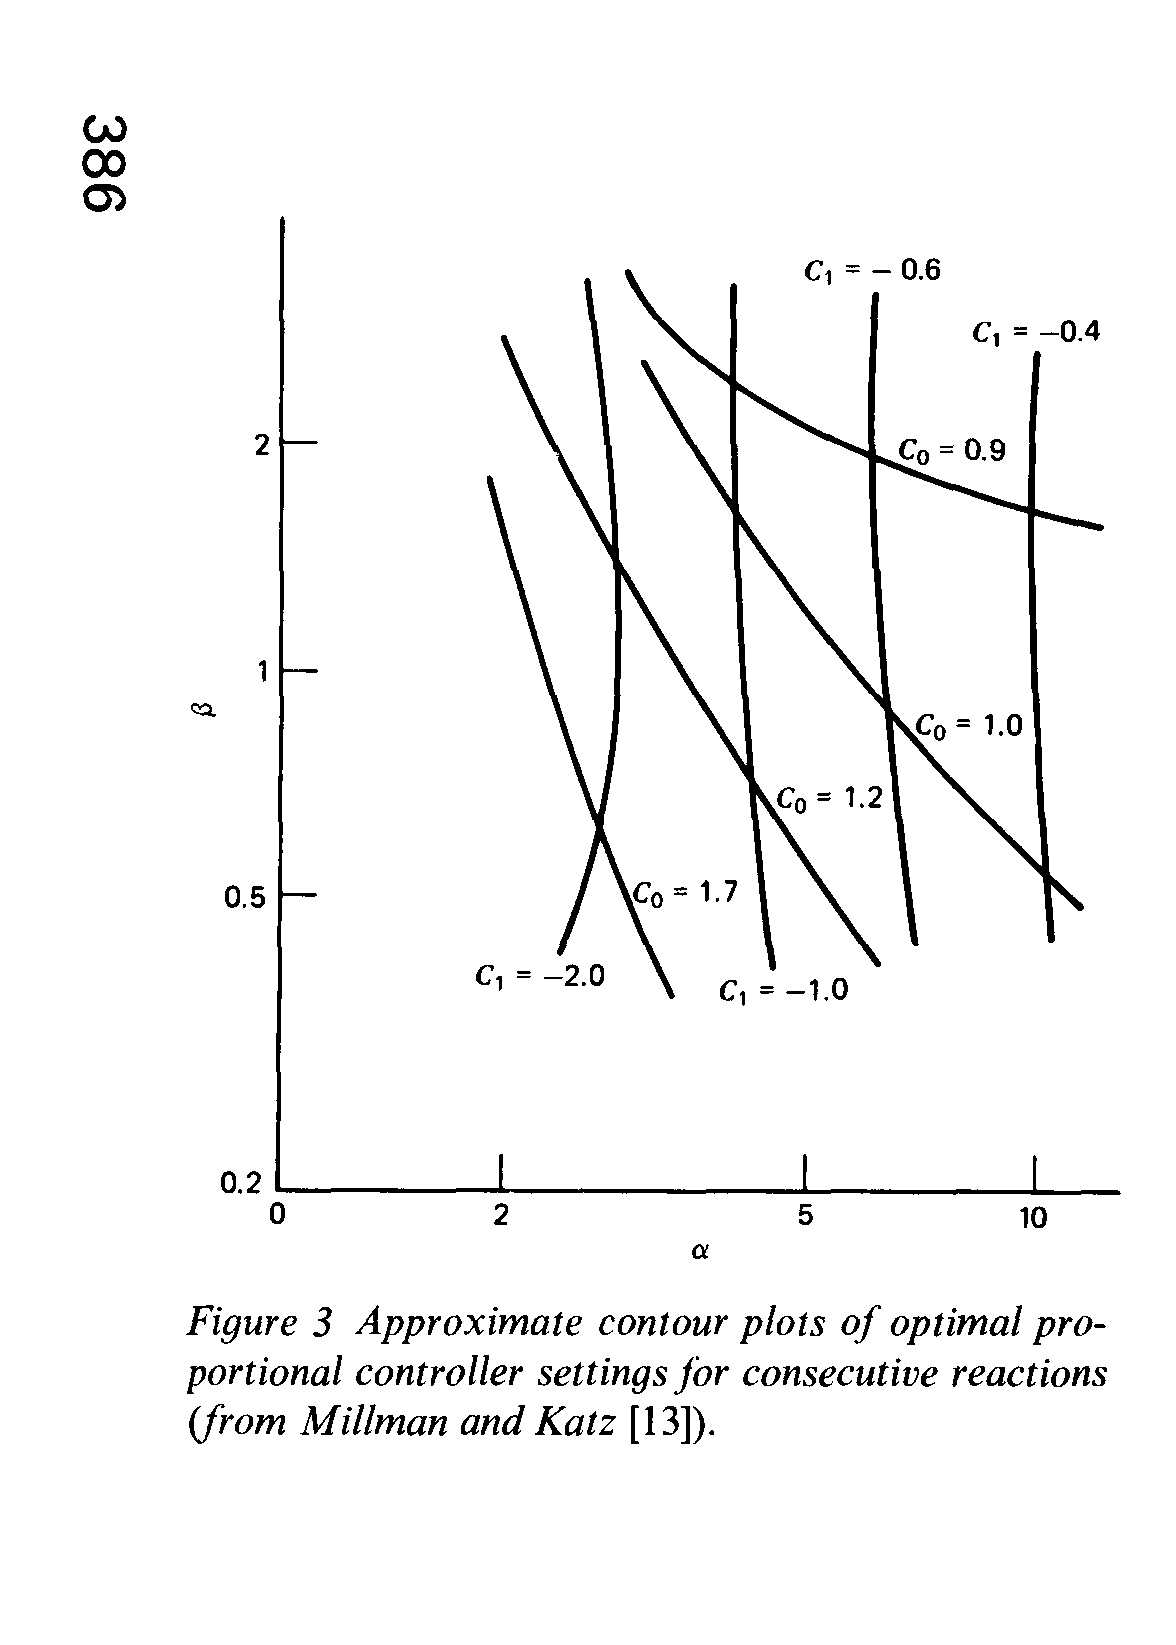 Figure 3 Approximate contour plots of optimal proportional controller settings for consecutive reactions (from Millman and Katz [13]).